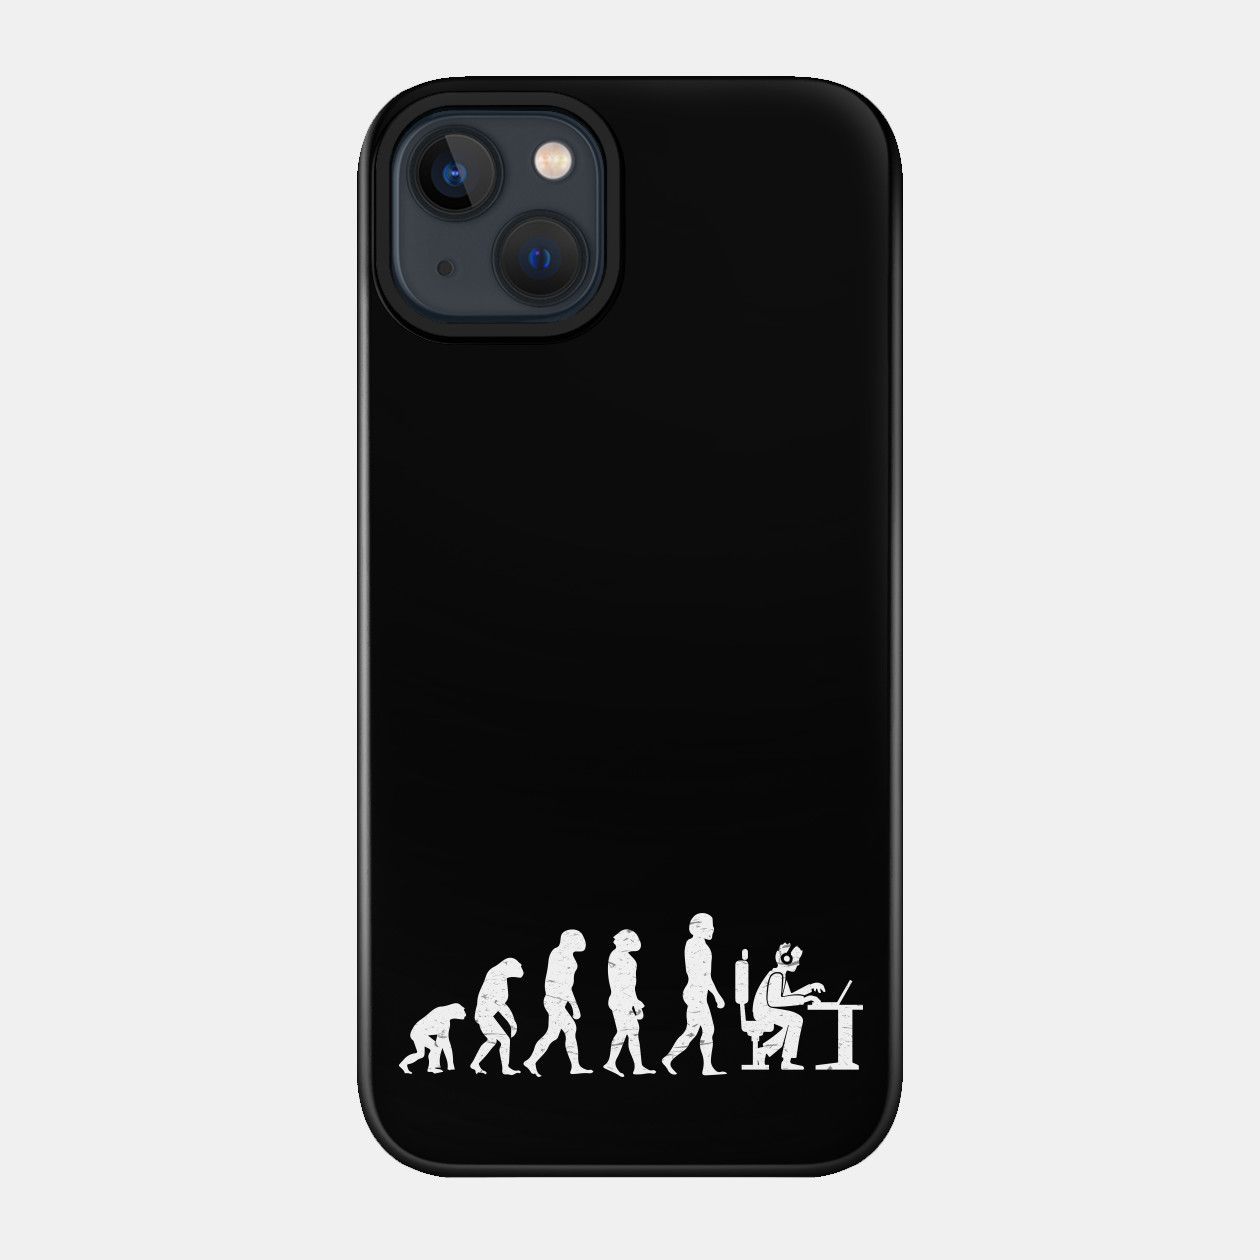 Evolution Of Gaming Iphone Case HD Wallpaper